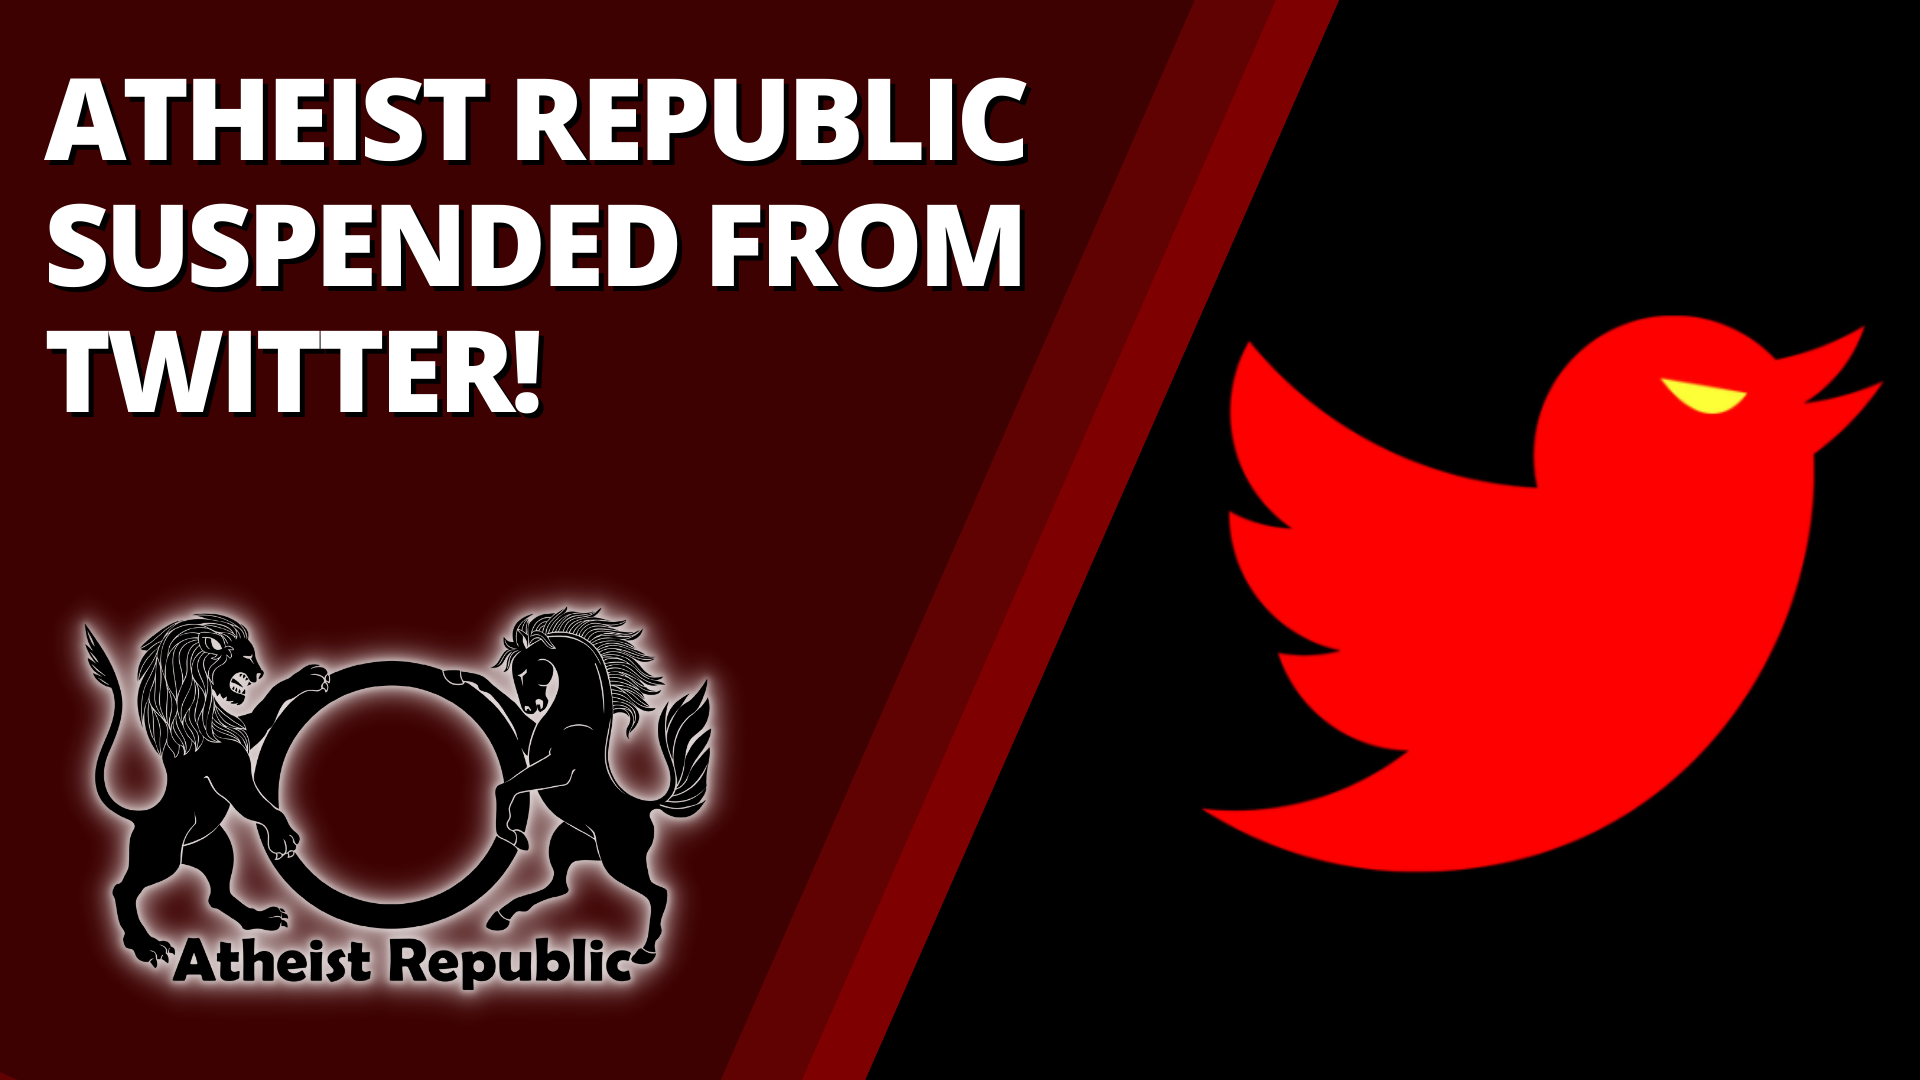 Atheist Republic Suspended From Twitter!